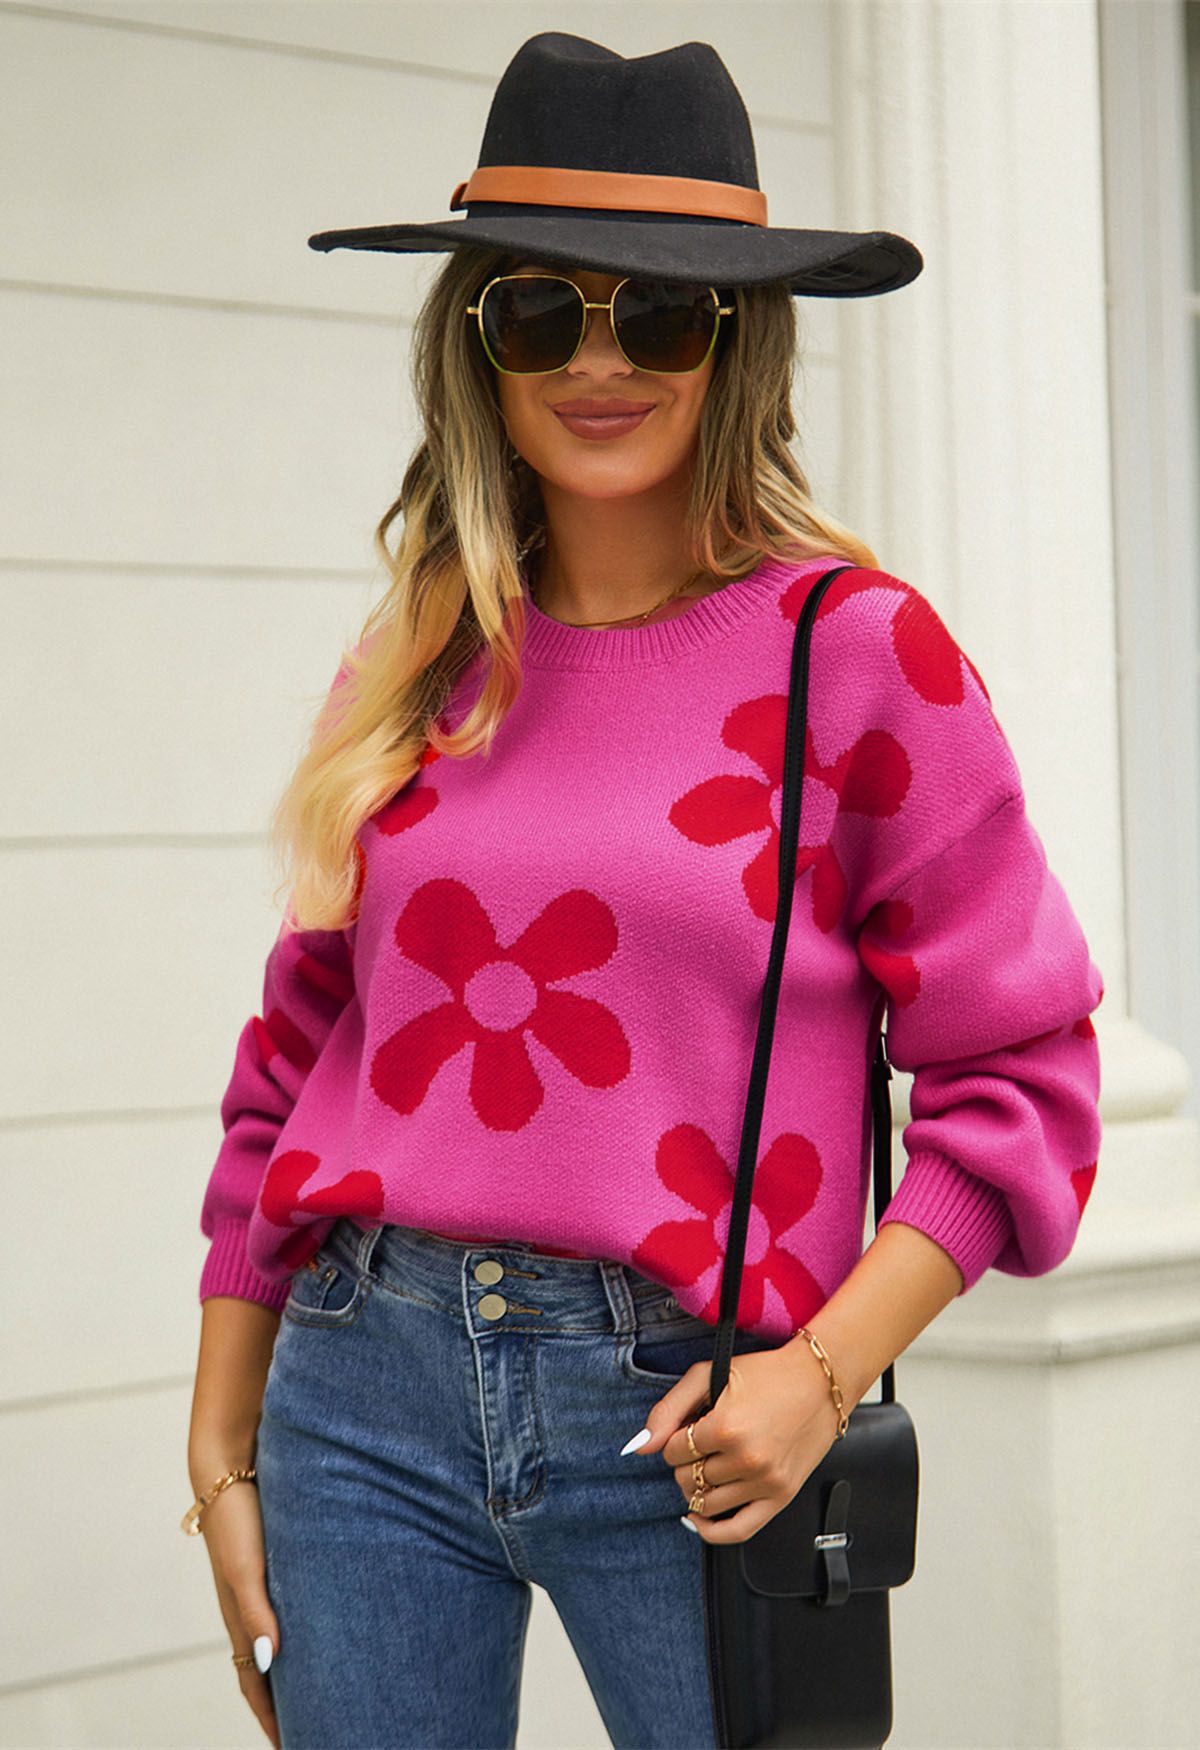 Cuteness Flowers Boxy Round Neck Knit Sweater in Hot Pink